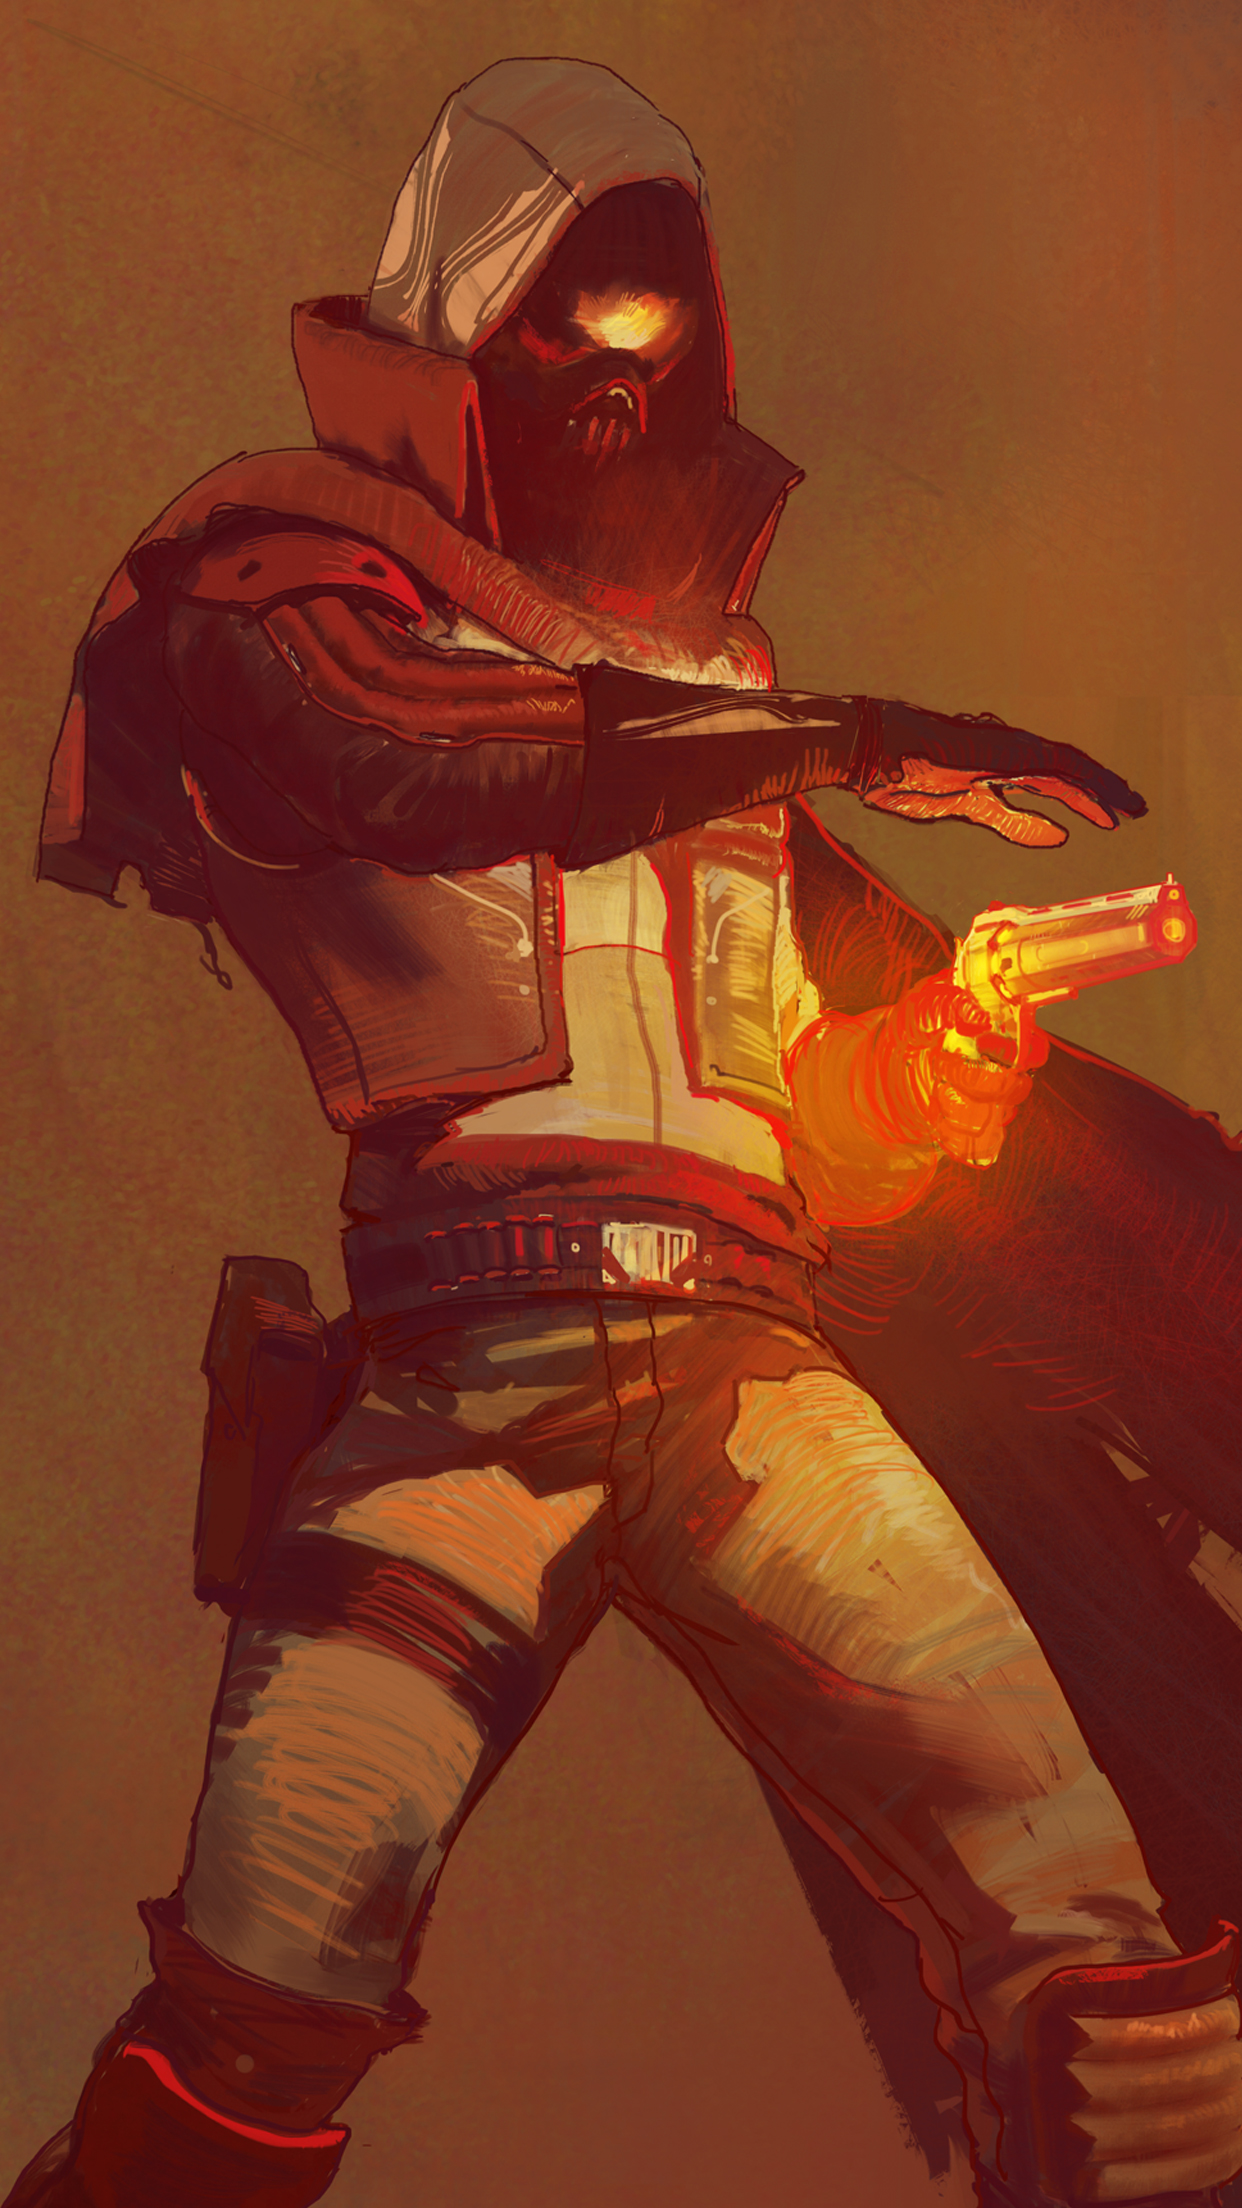 Destiny 2 game character in hooded armor with a glowing hand cannon, designed as a vertical phone wallpaper.